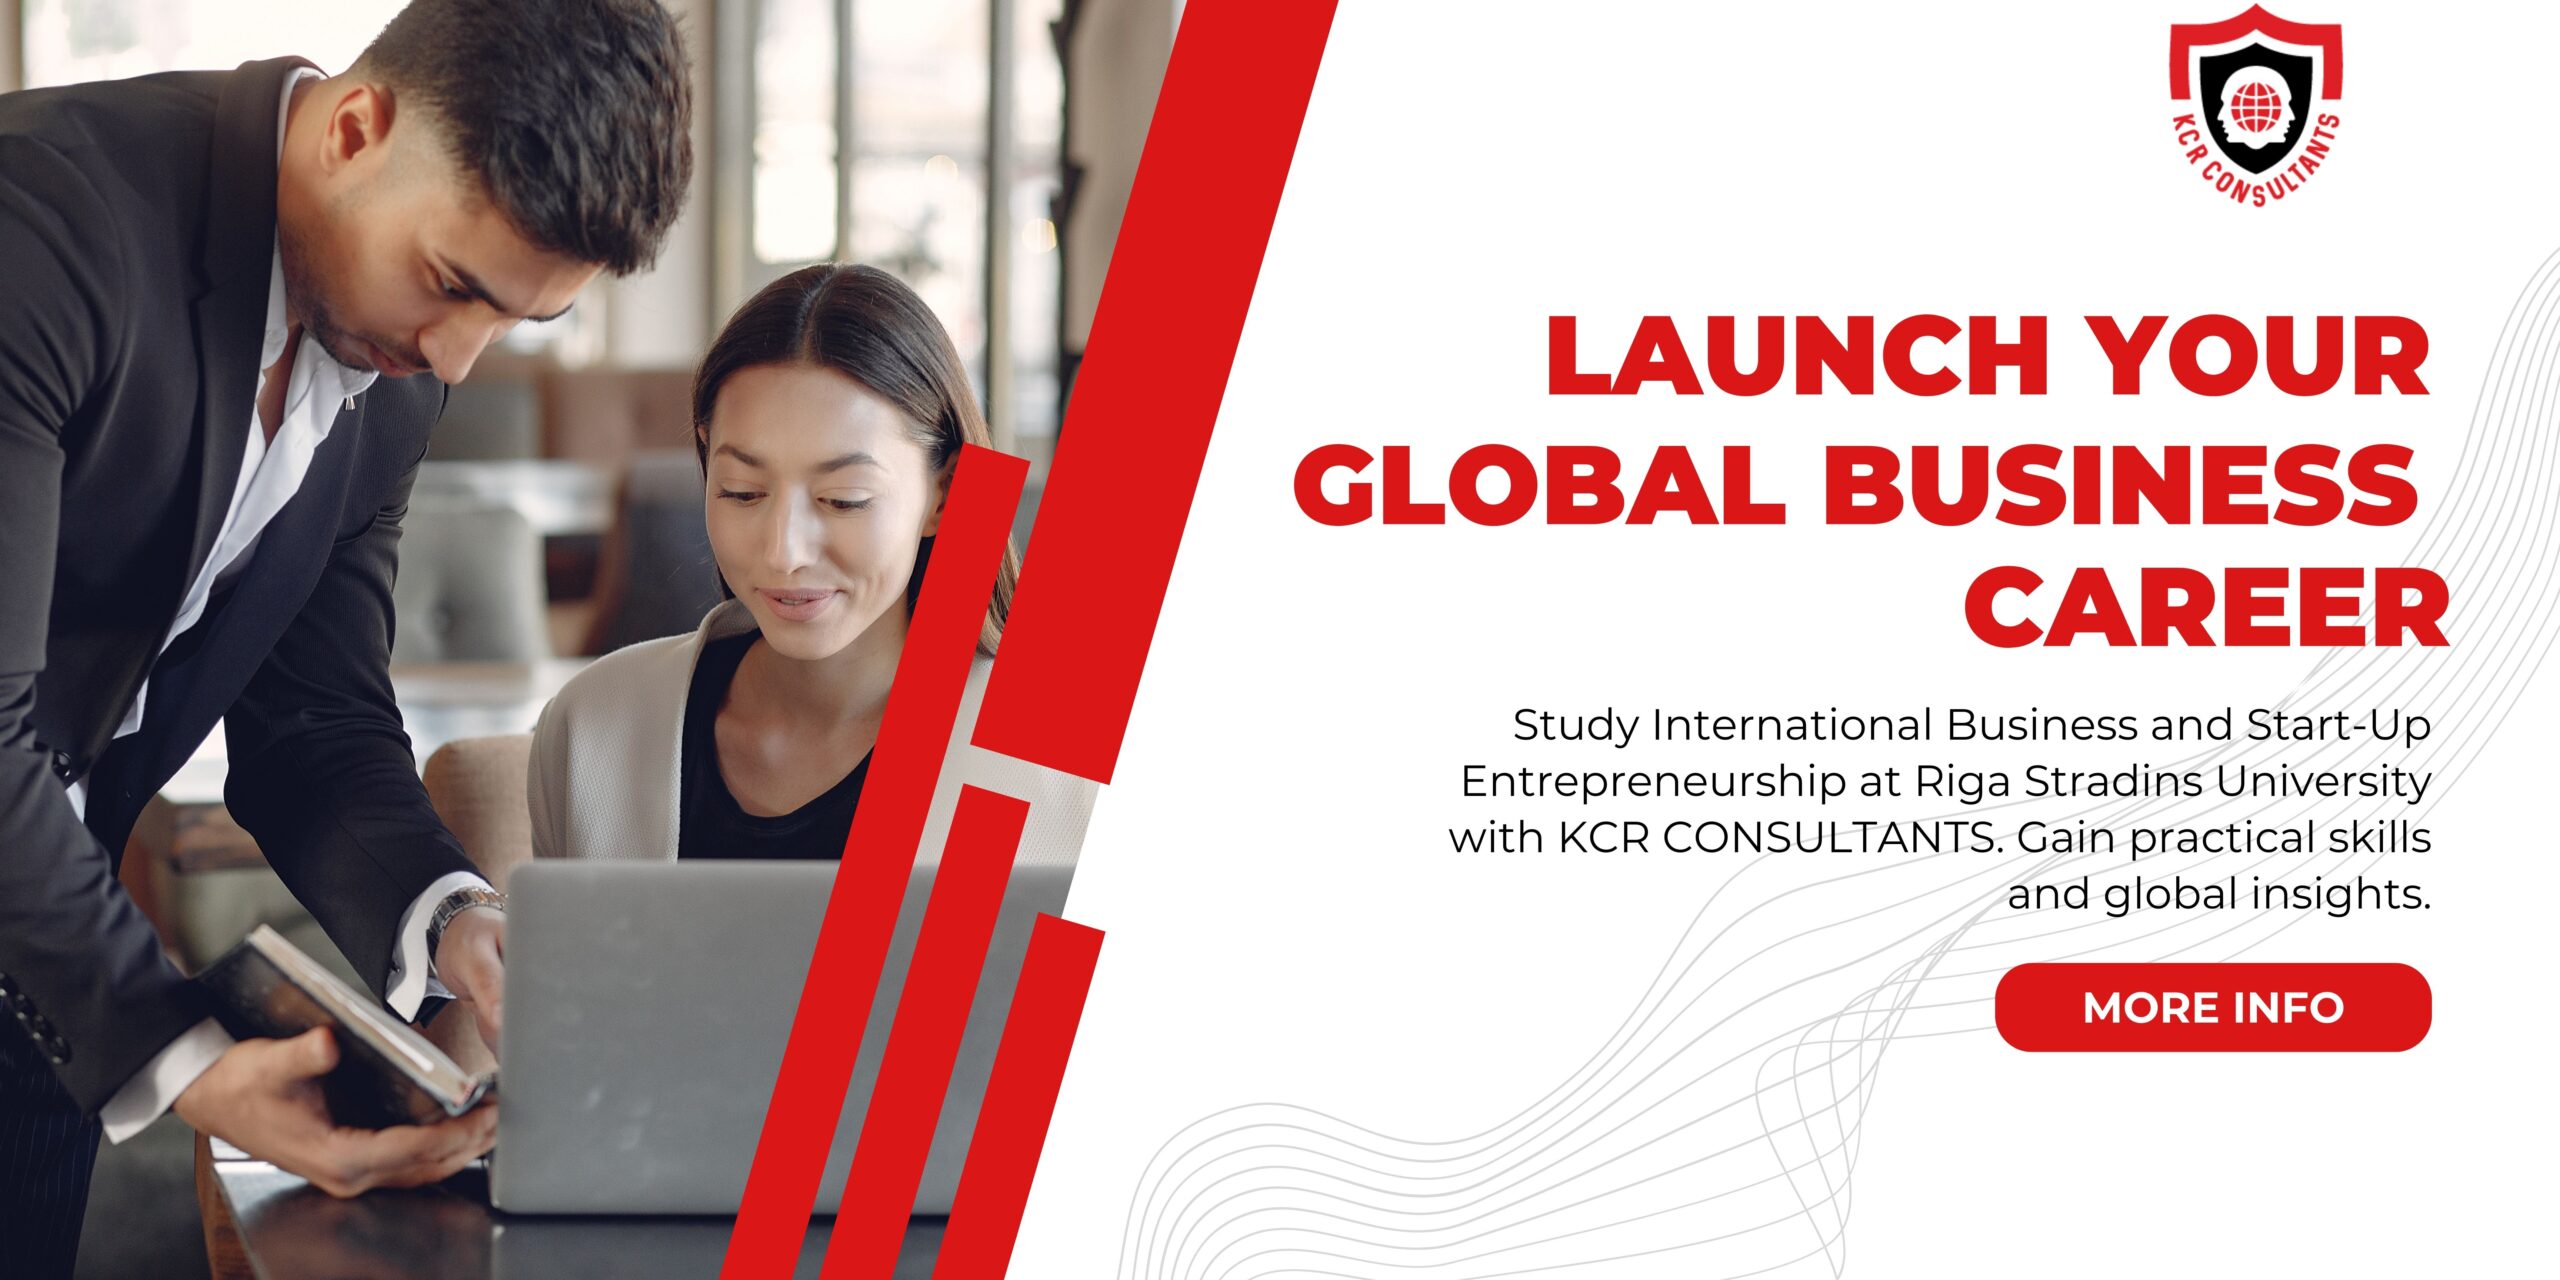 Launch Your Global Business Career scaled